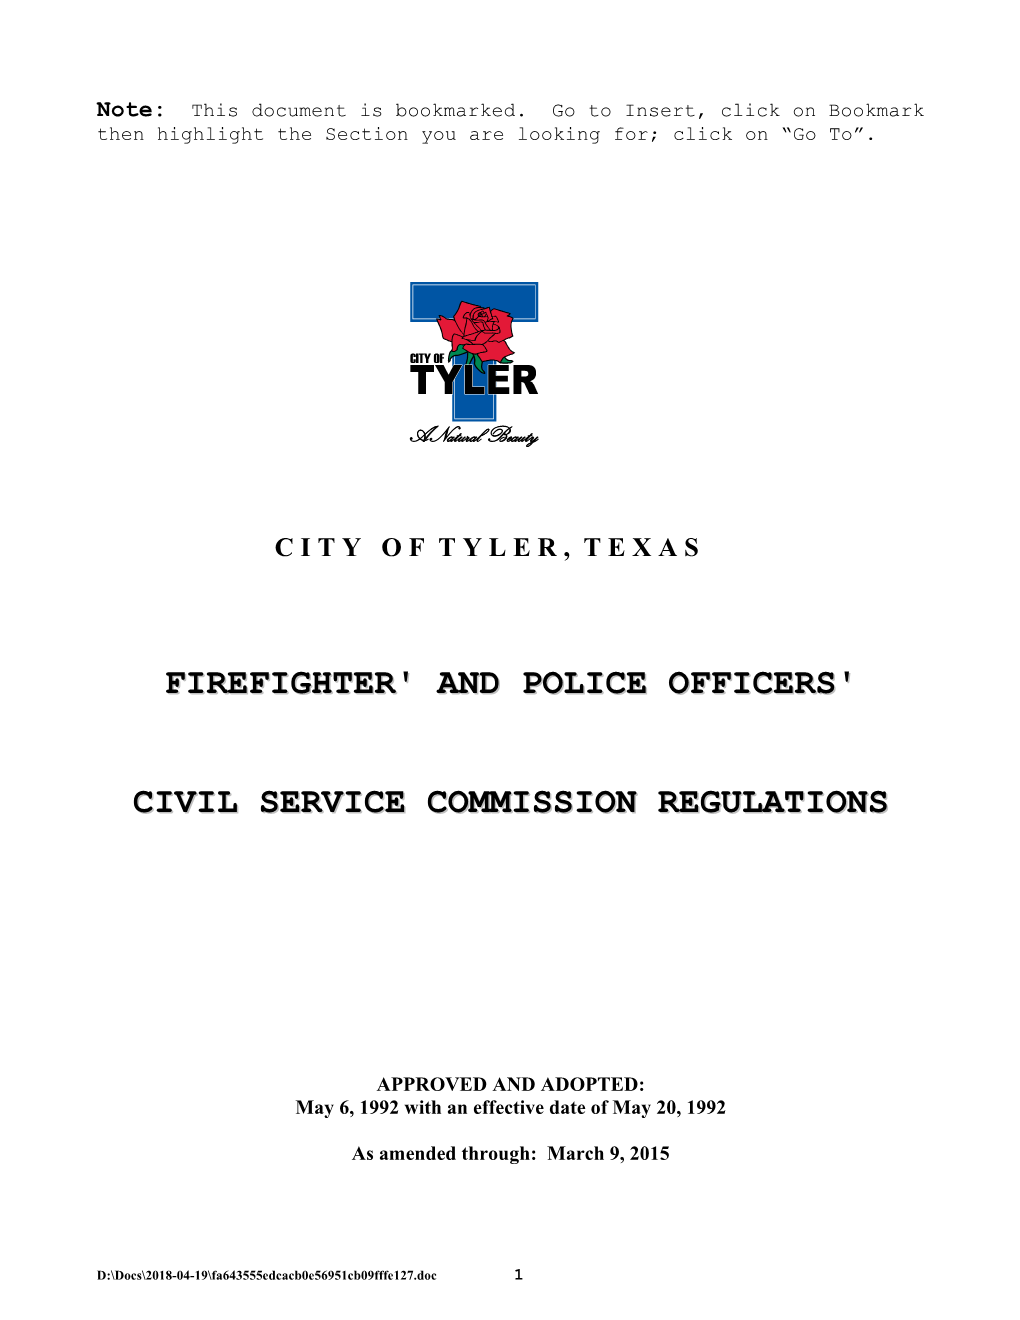 Firefighter' and Police Officers'